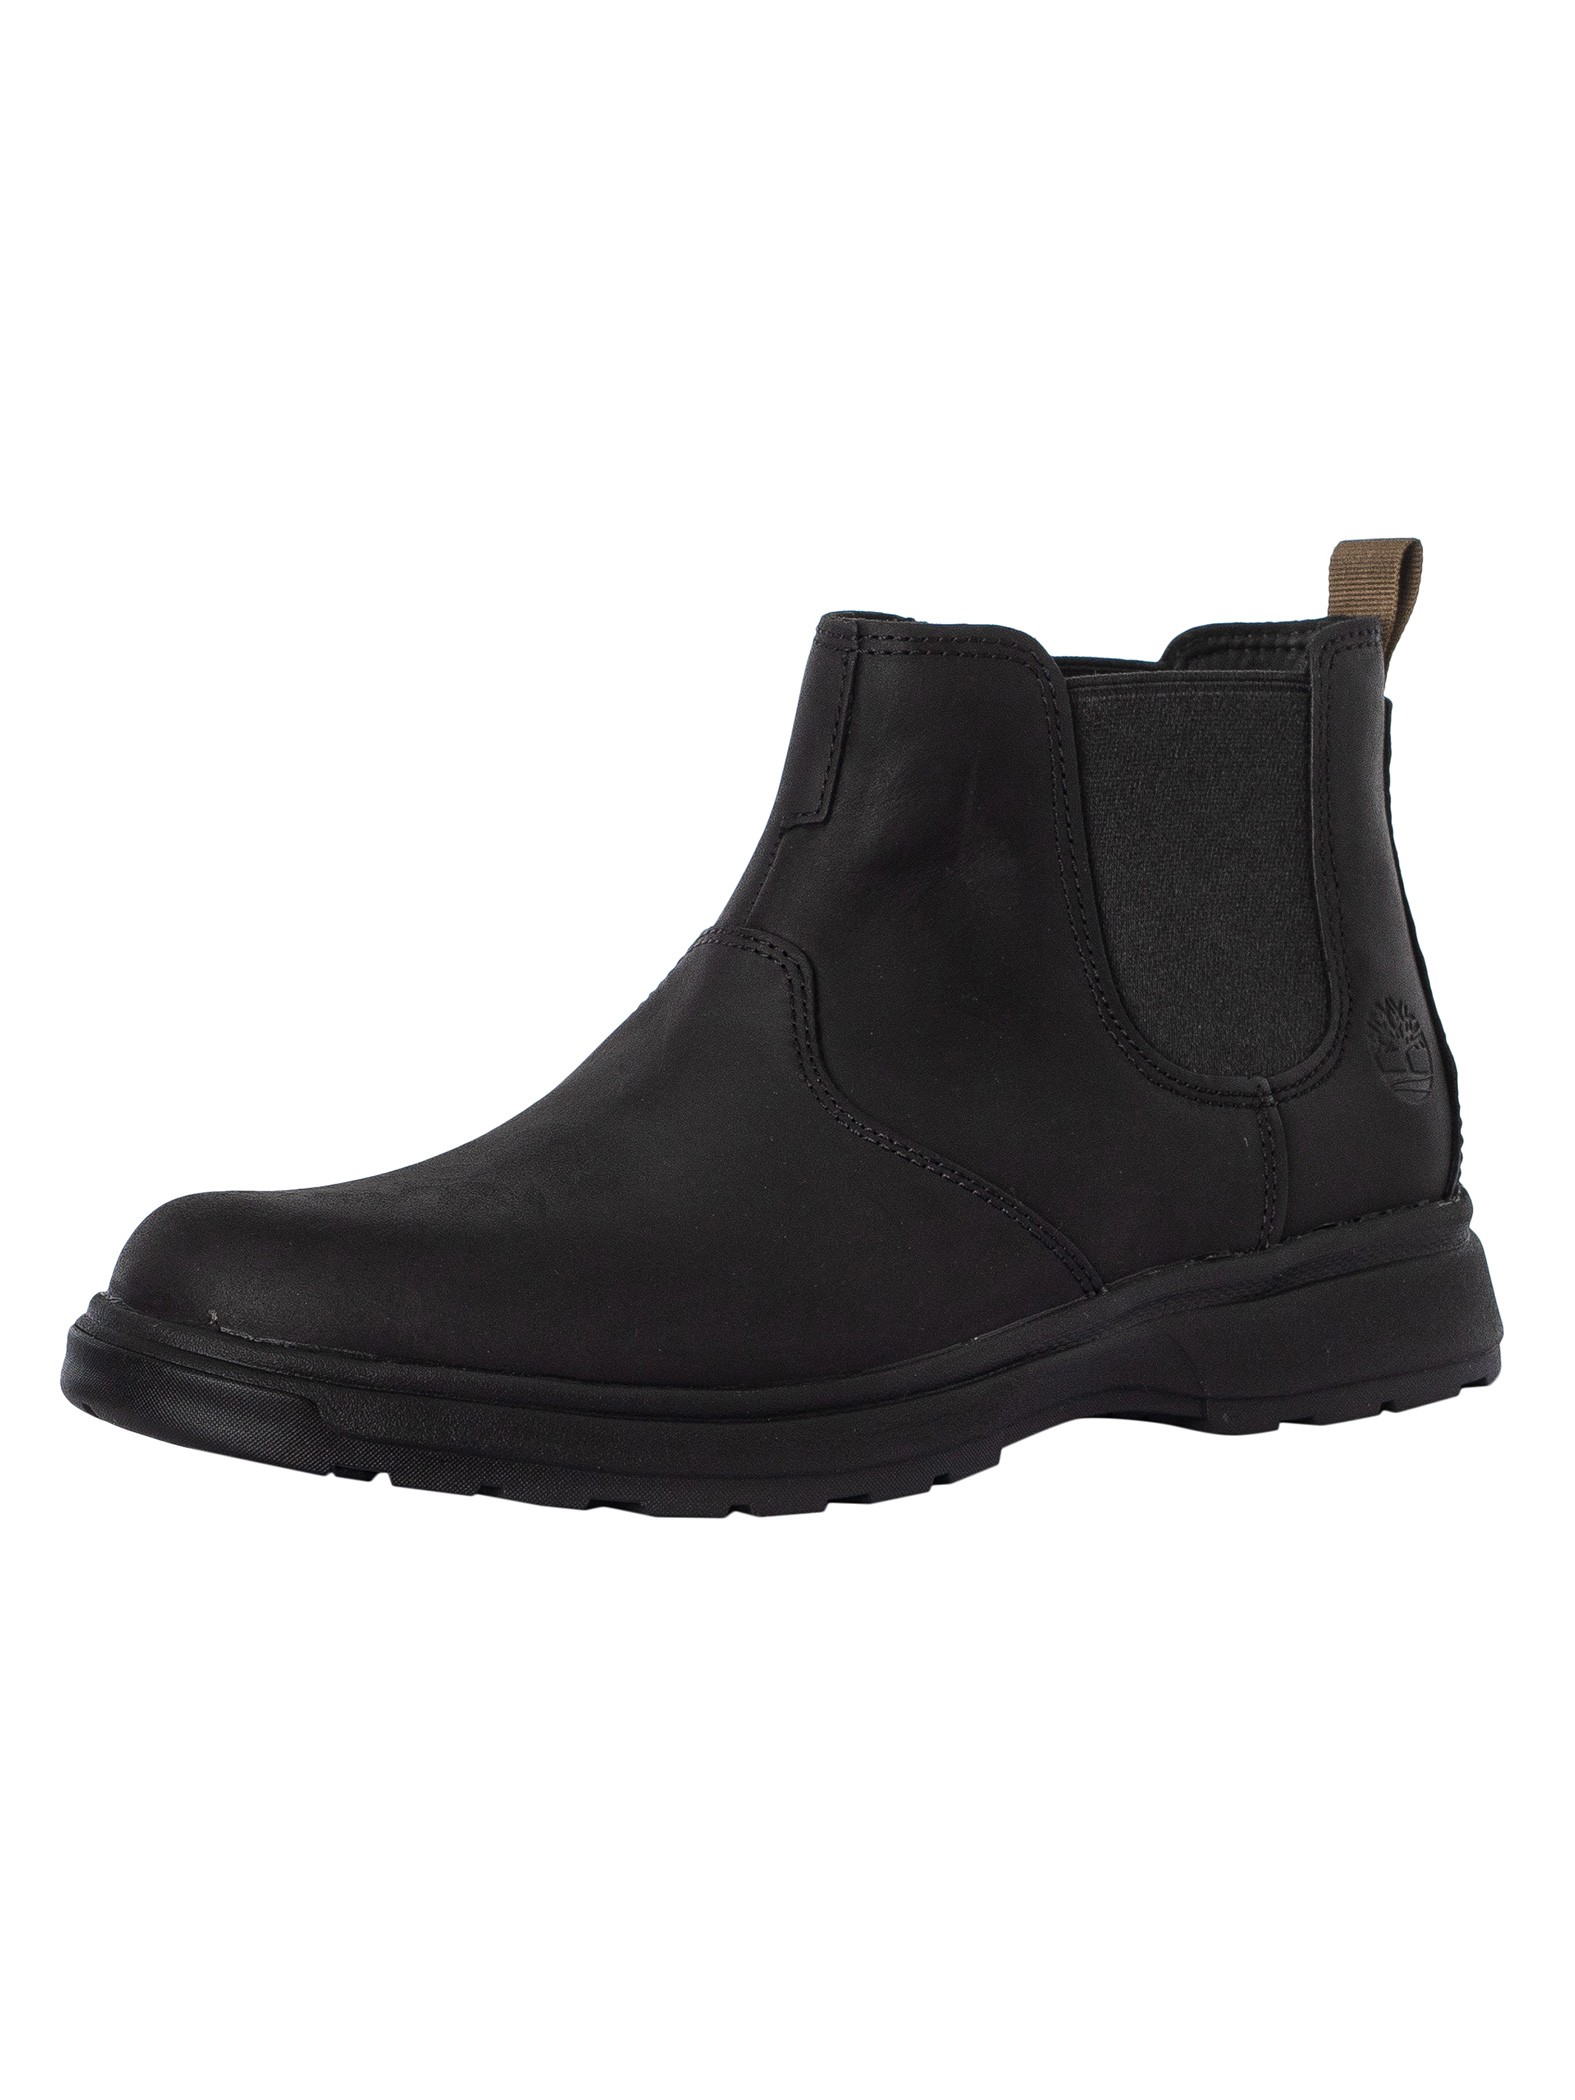 Atwells Ave Chelsea Boots product